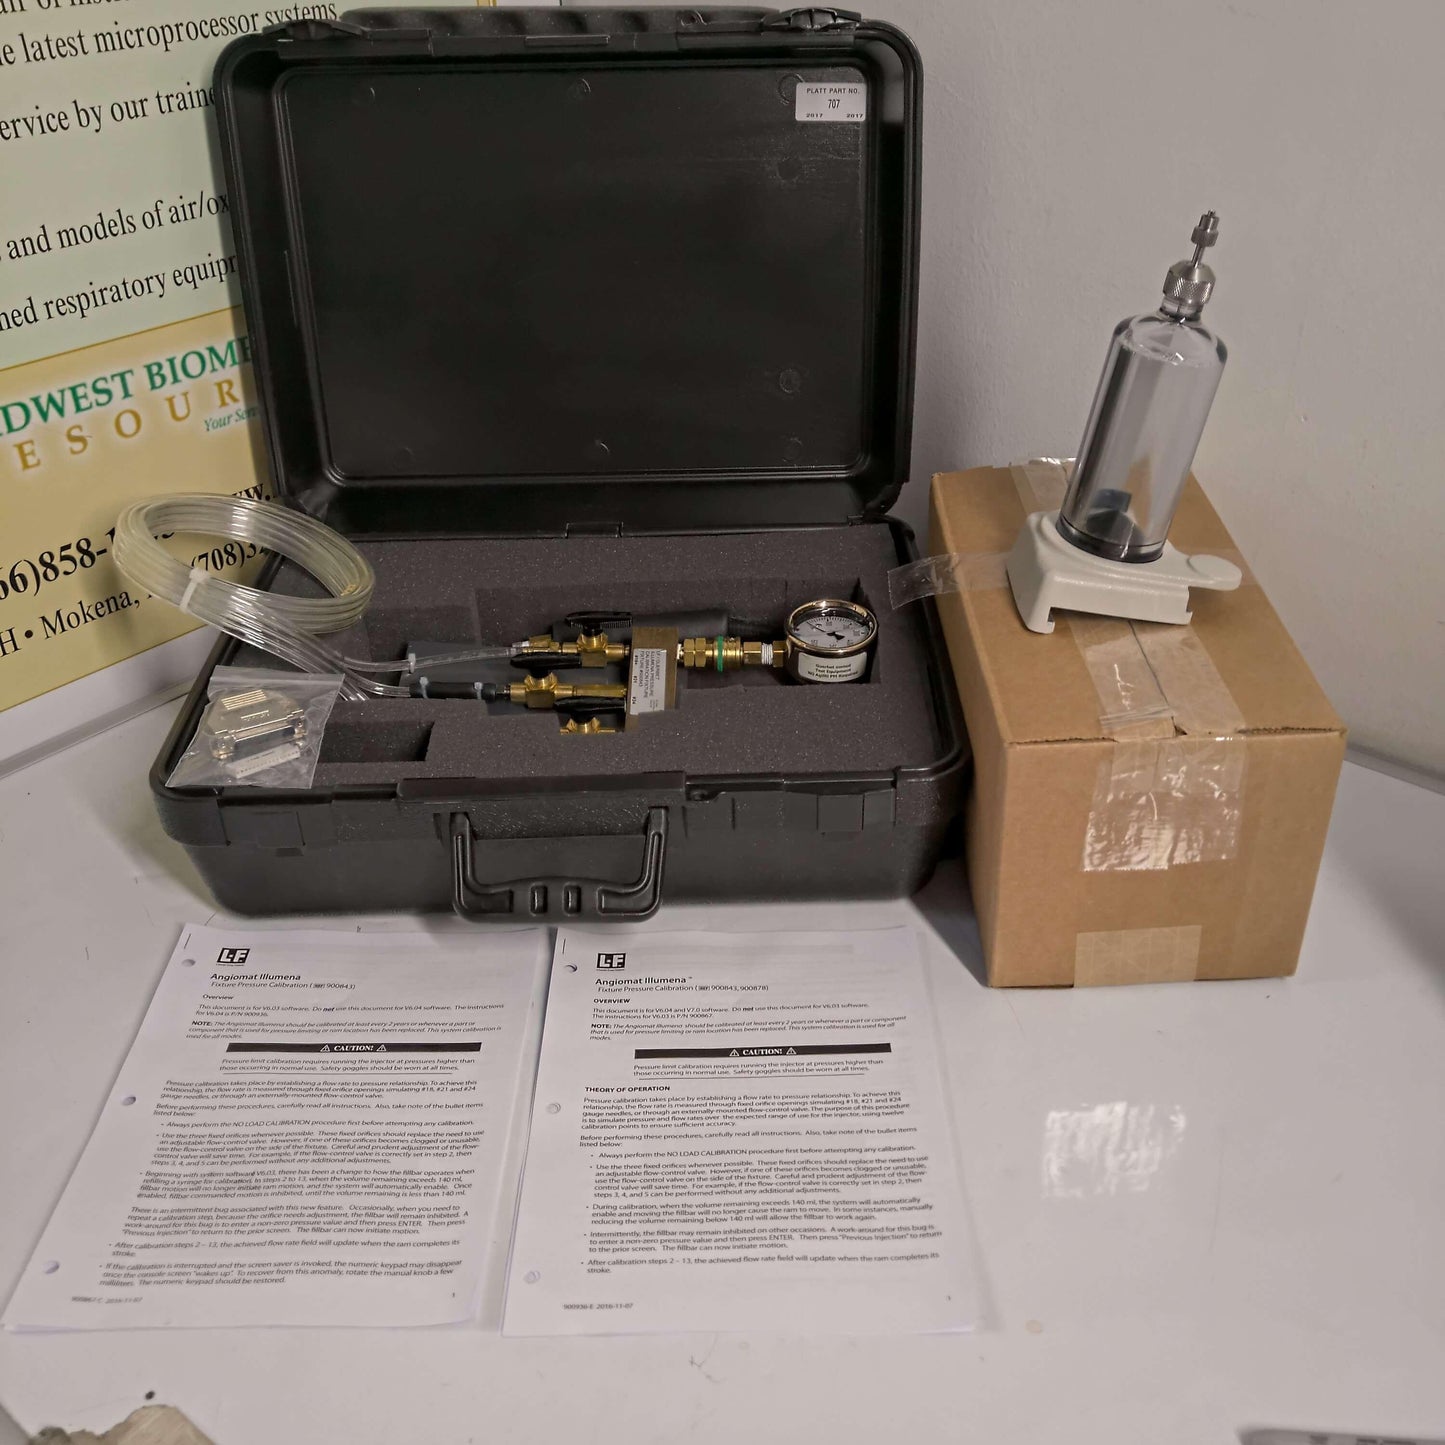 NEW Angiomat Illumena Pressure Calibration Fixture with Warranty & FREE Shipping - MBR Medicals